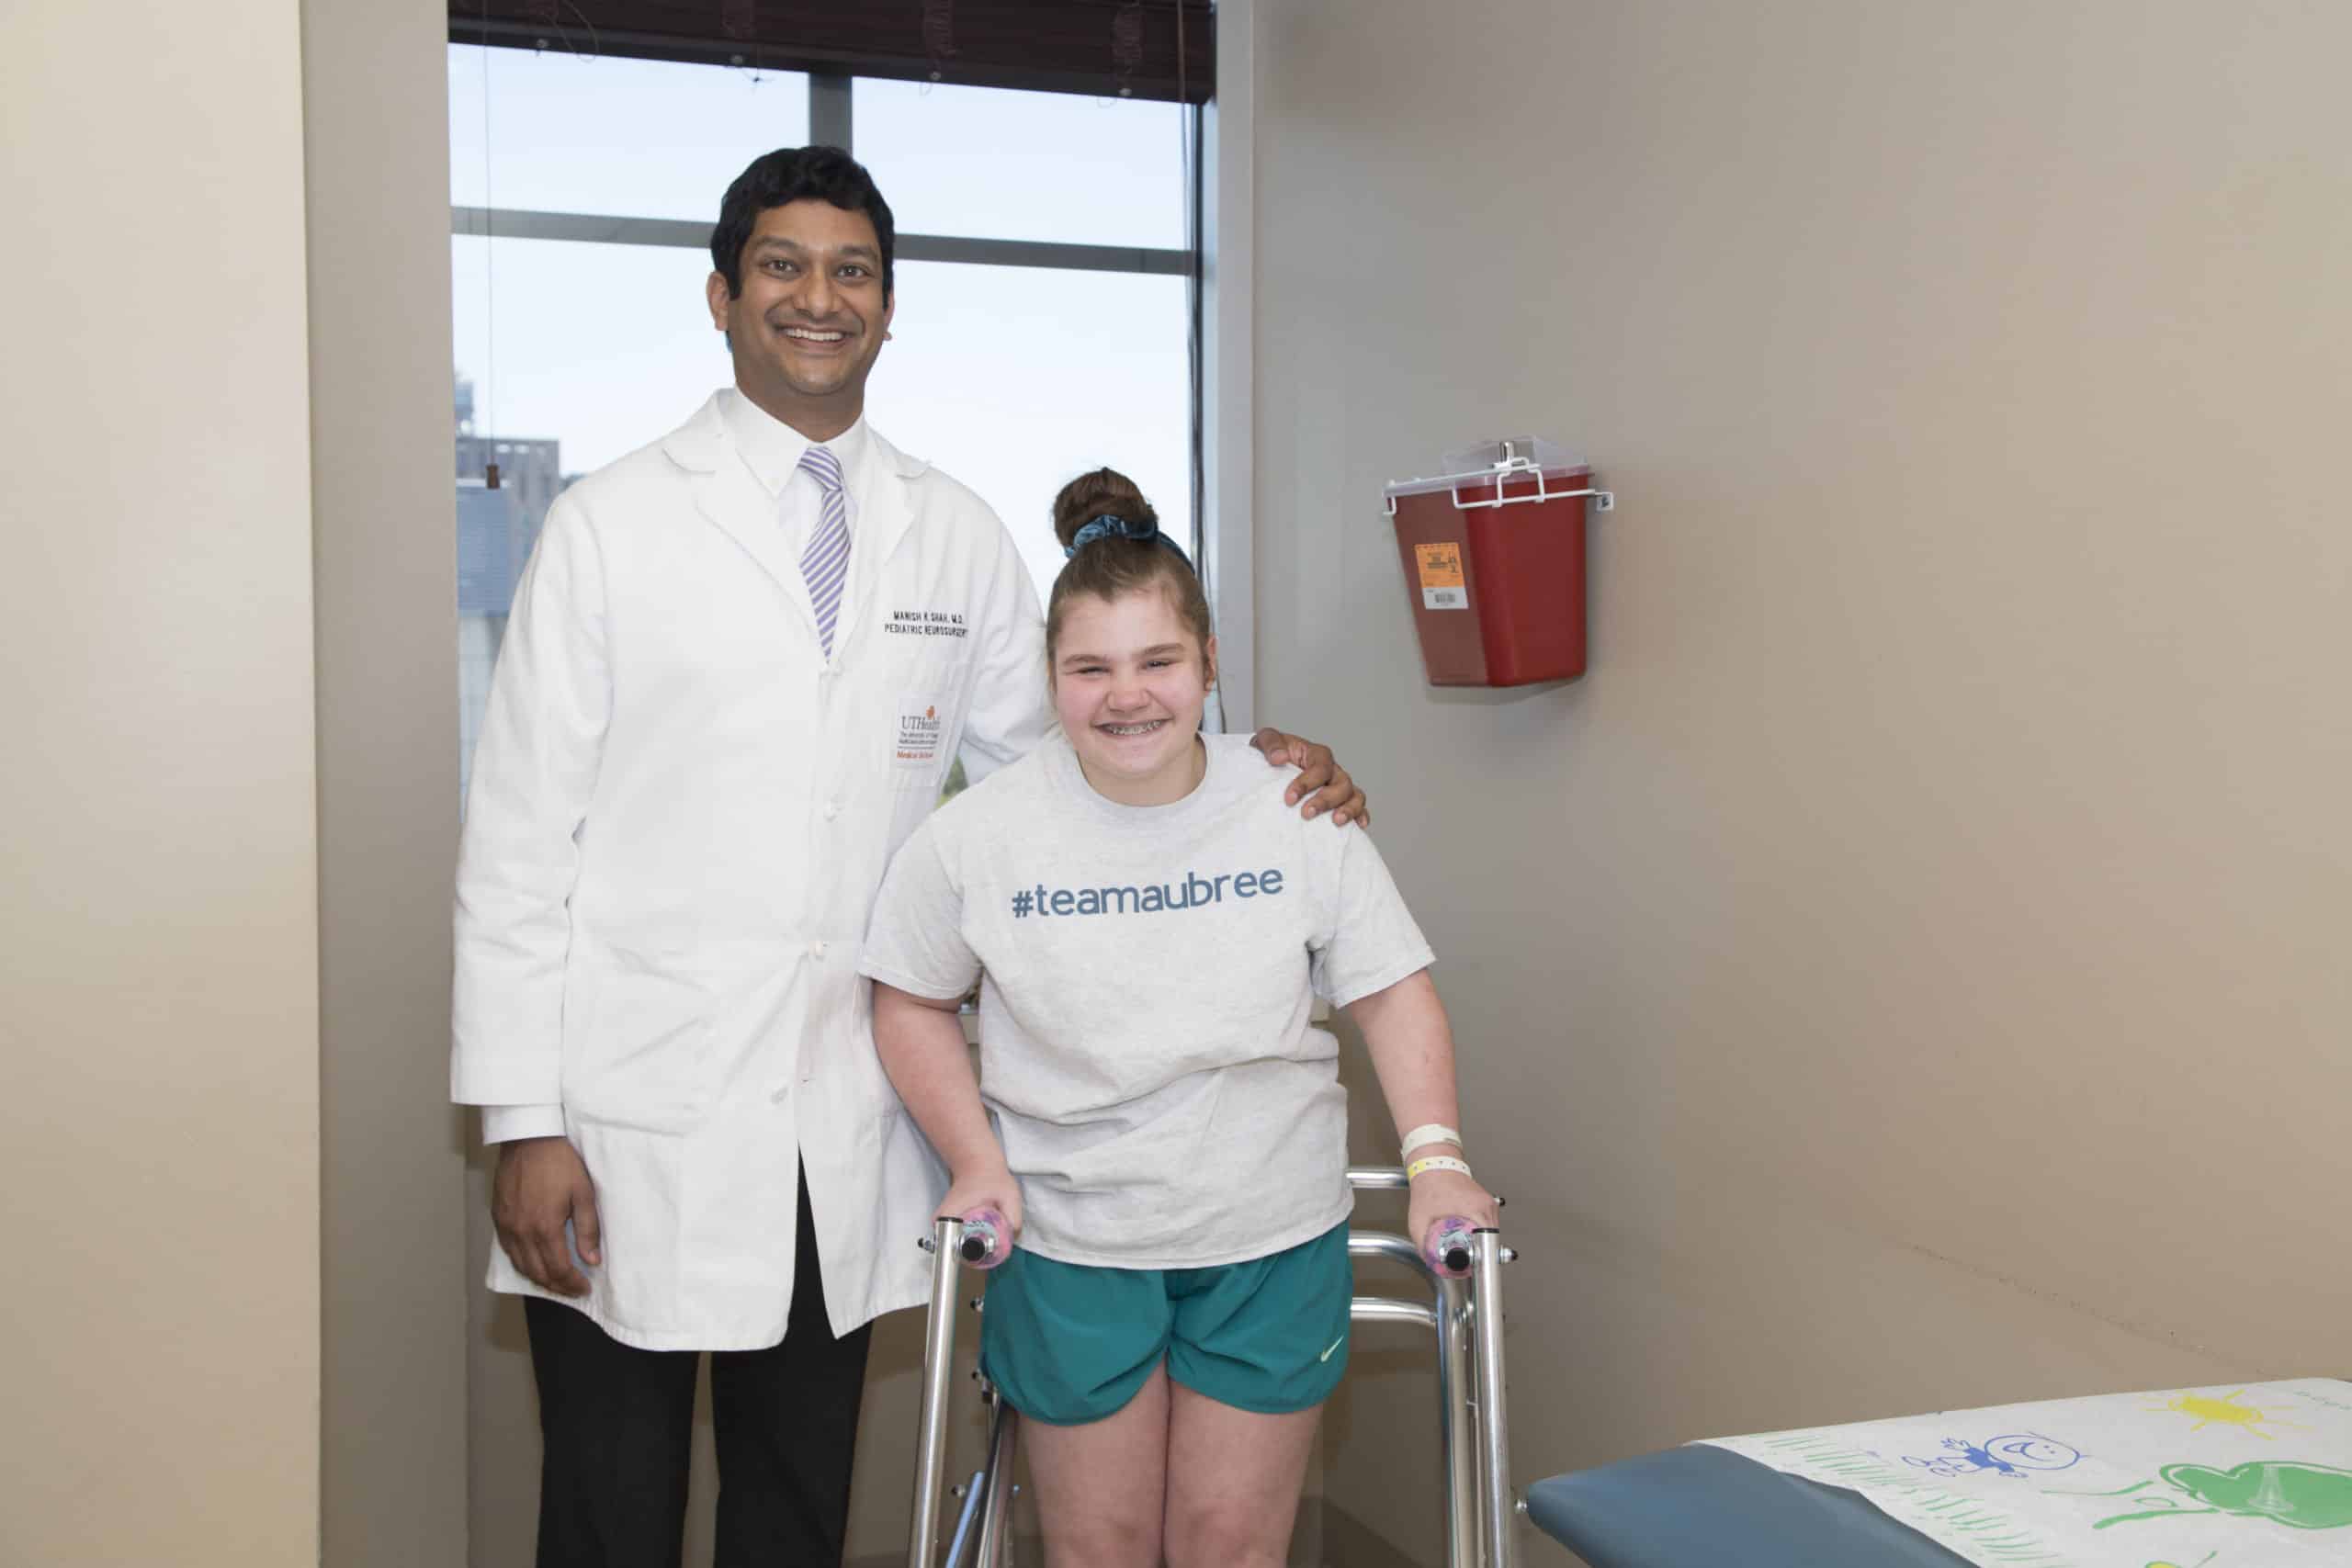 Manish N. Shah, M.D meets with Aubree for a check up.